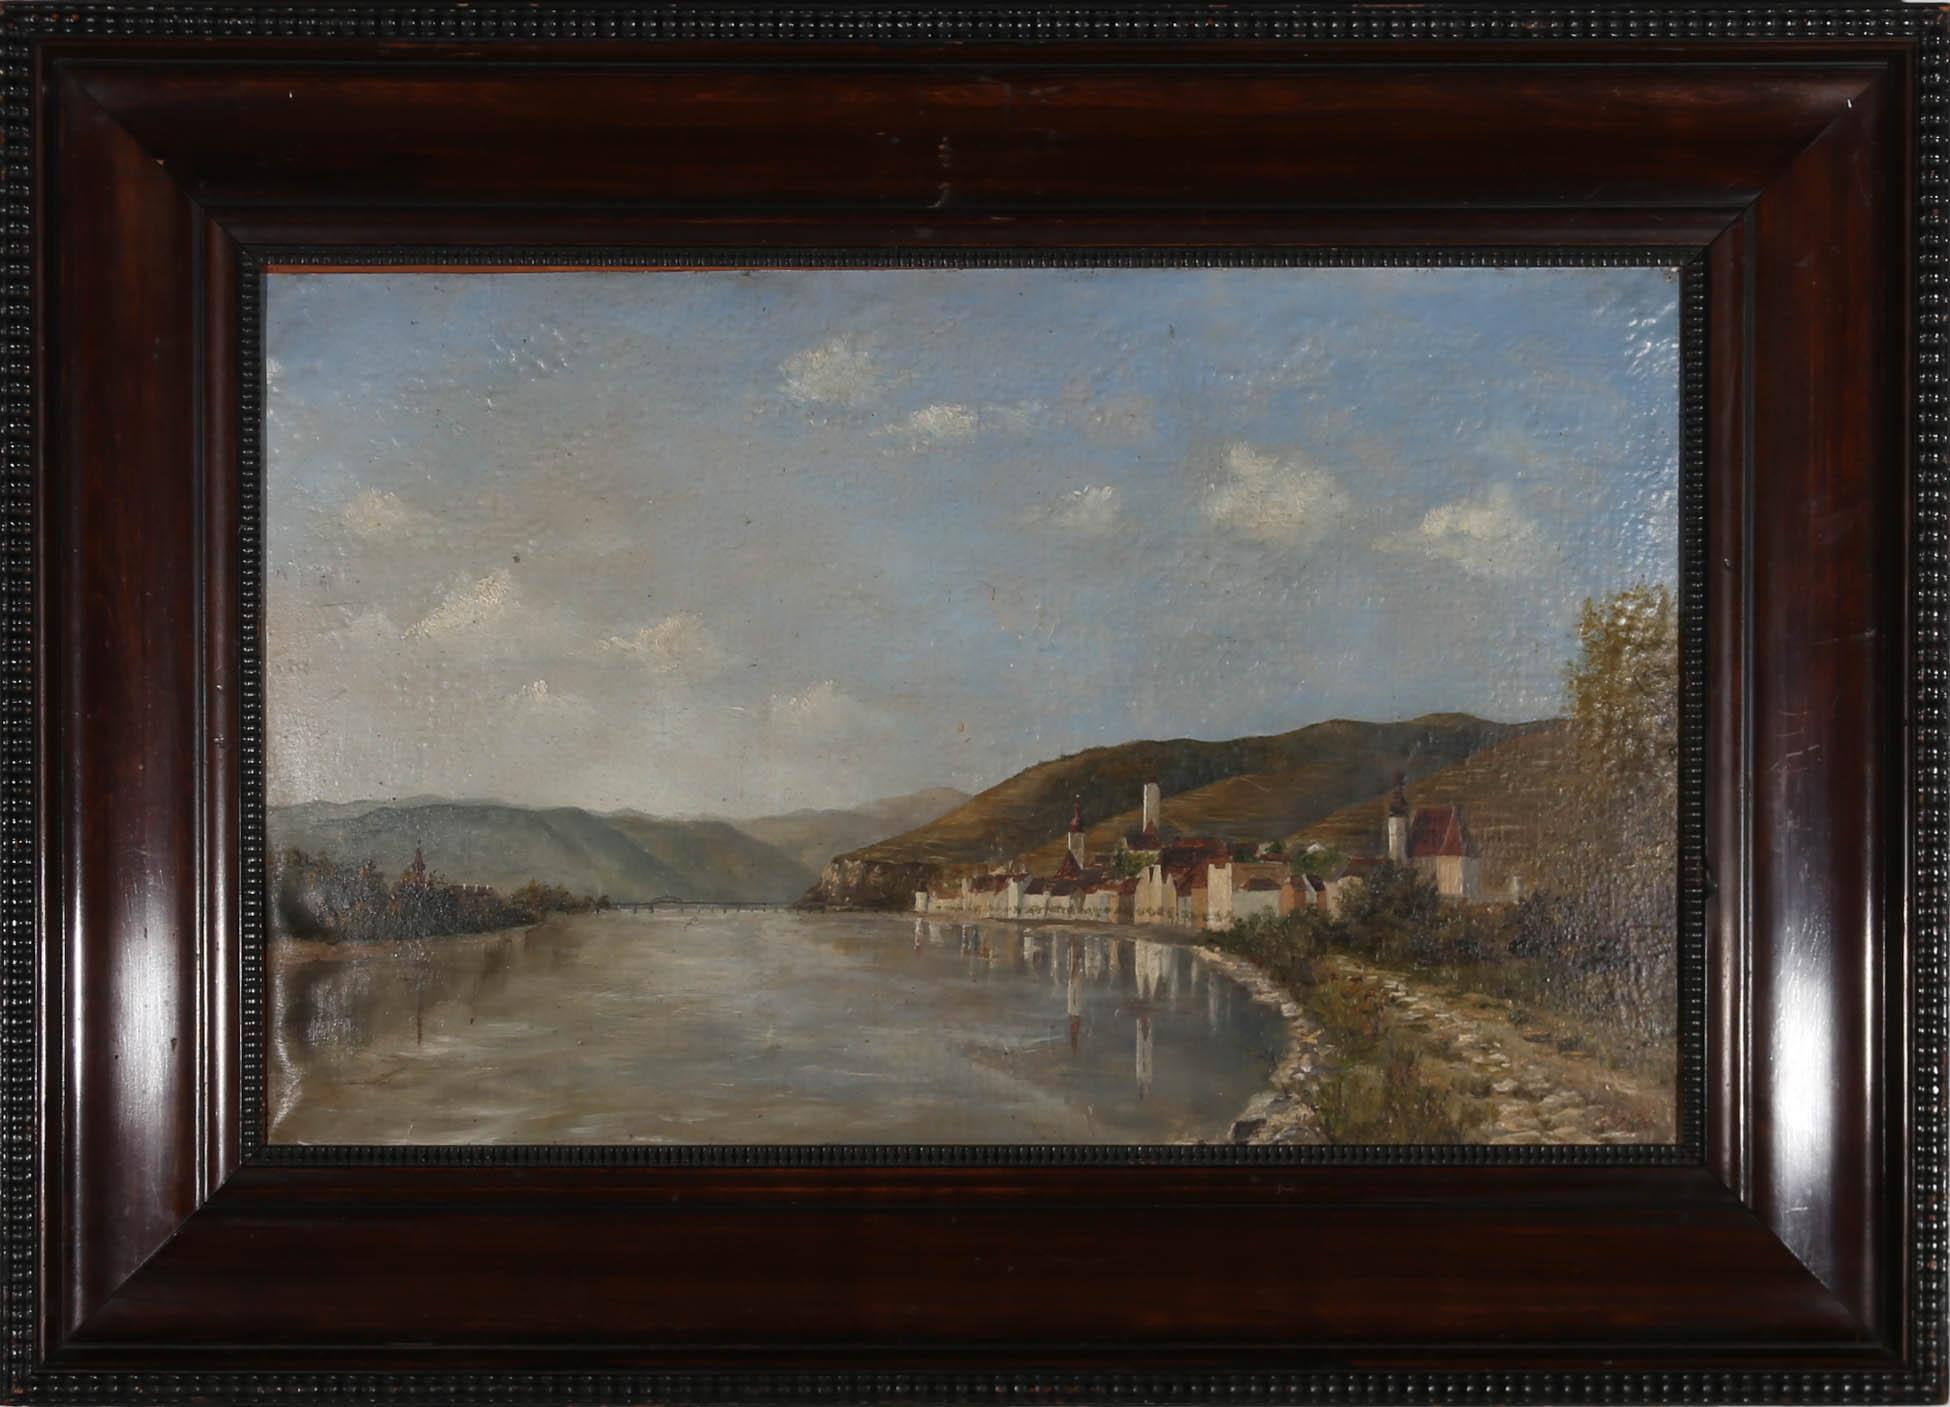 A charming depiction of a town on the verge of lake Starnberg in Germany. Provenance of this painting shows that it was brought out of Germany in 1938 by the vendors late parents thence by family descent. Signed to the lower right. Presented in a